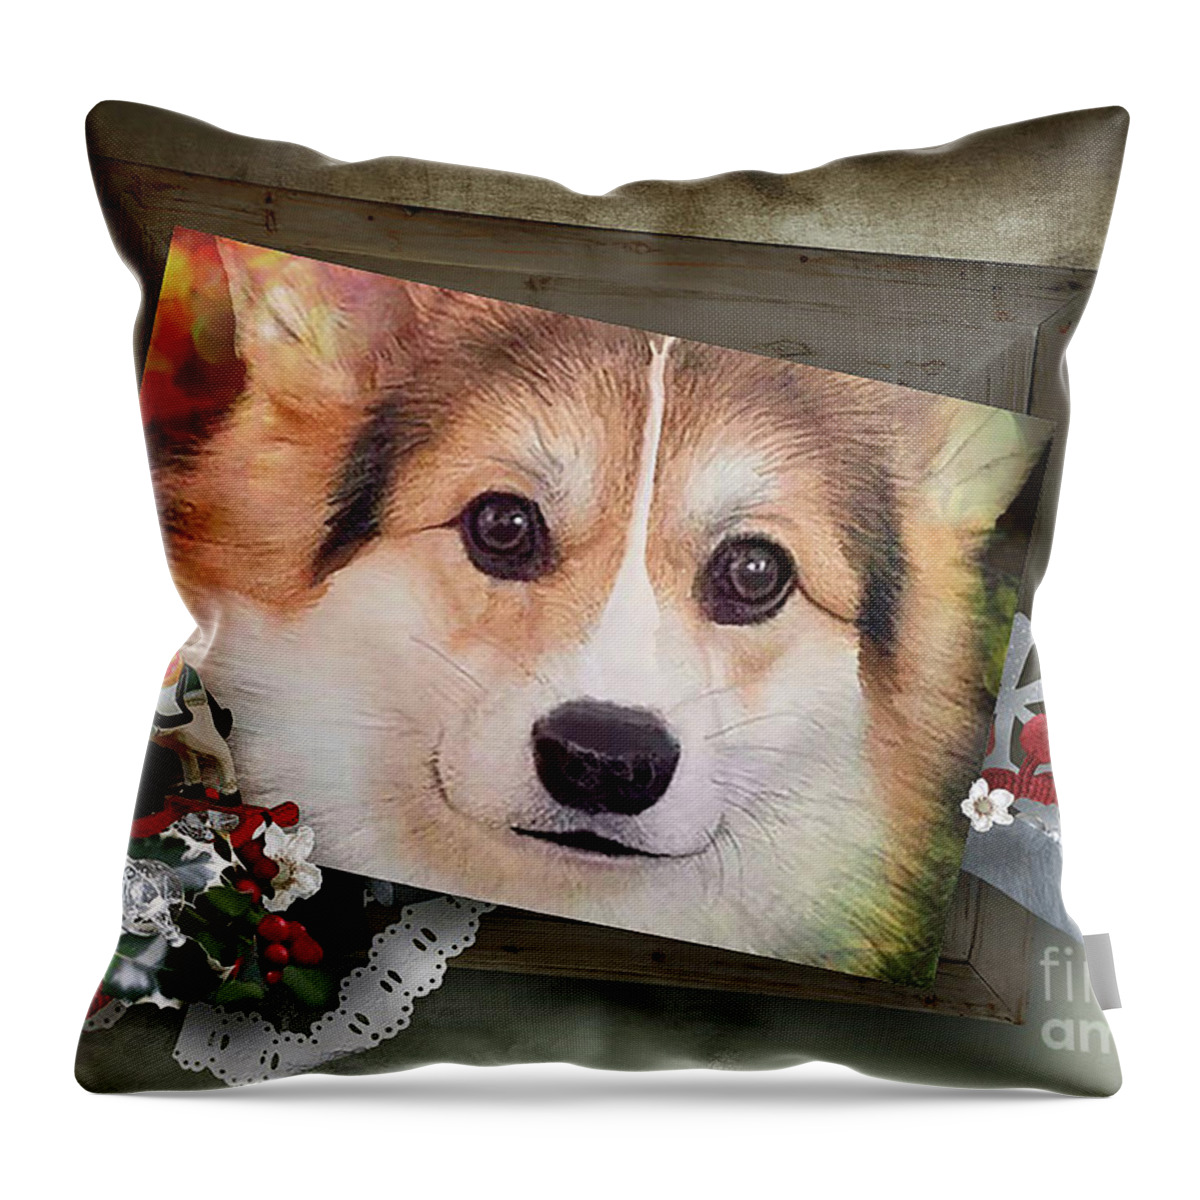 Welsh Corgi Throw Pillow featuring the digital art Holiday Tricolor Corgi by Kathy Kelly